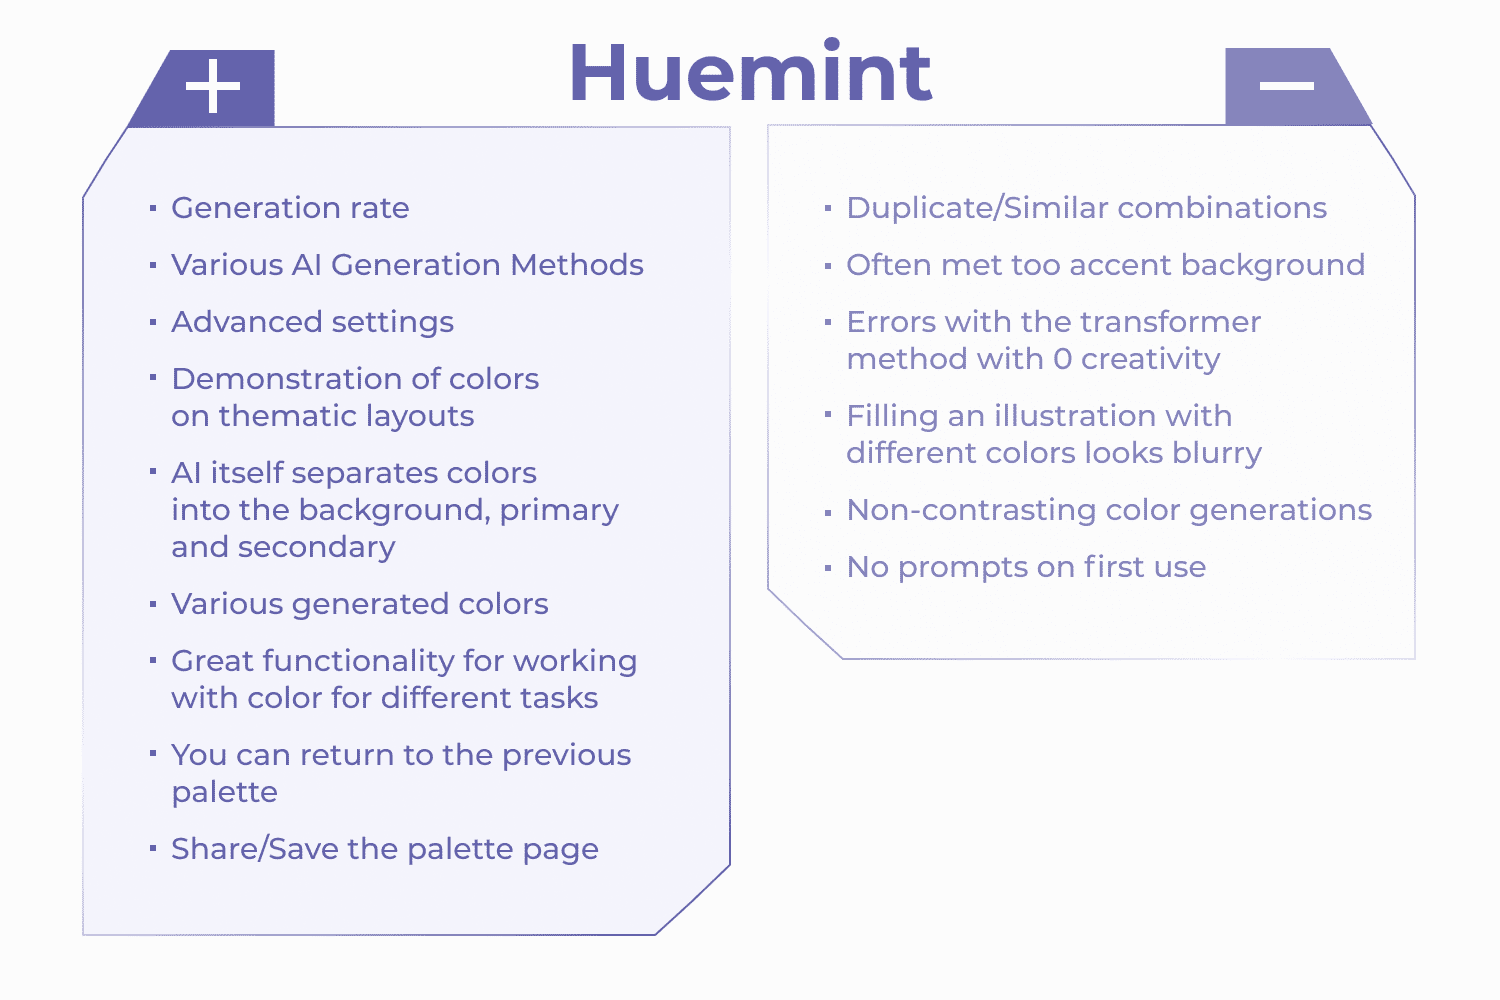 Table with the advantages and disadvantages of Huemint.